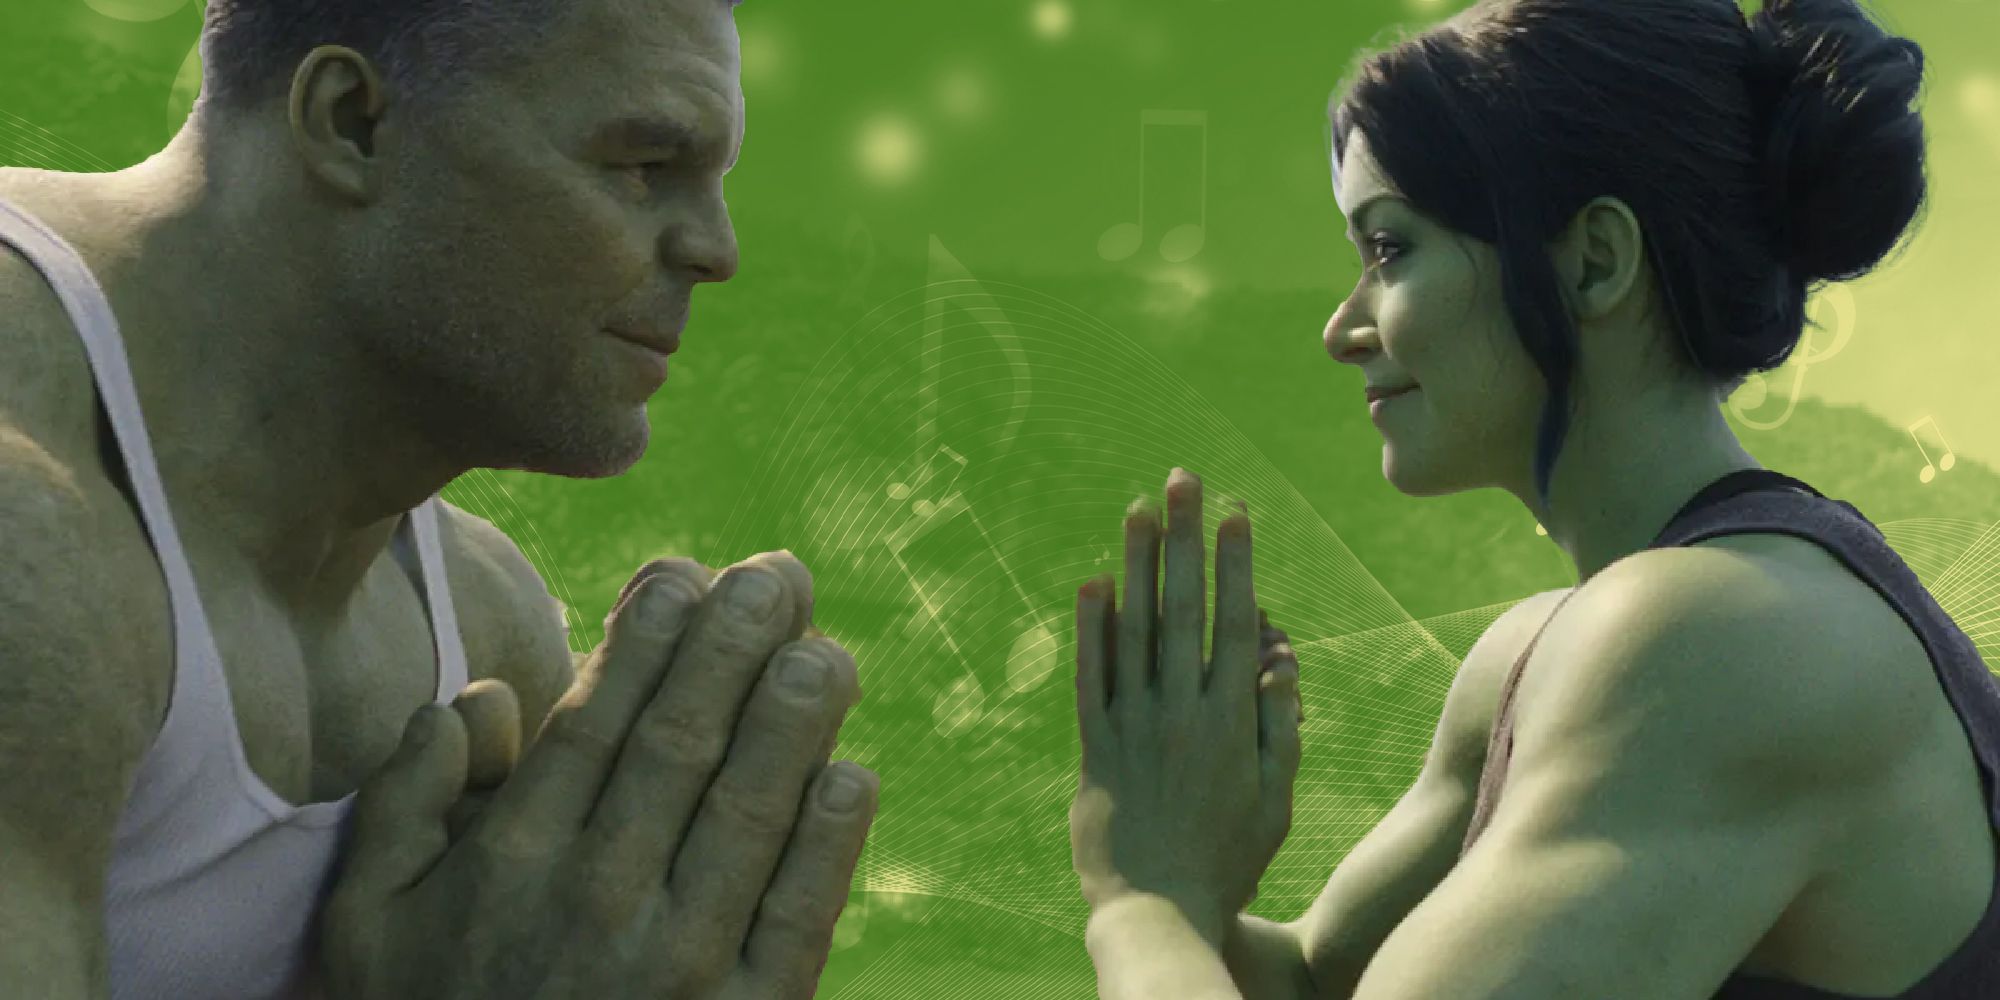 Bruce Banner and Jen Walters, both in Hulk form, face each other against a green backdrop with music notes.